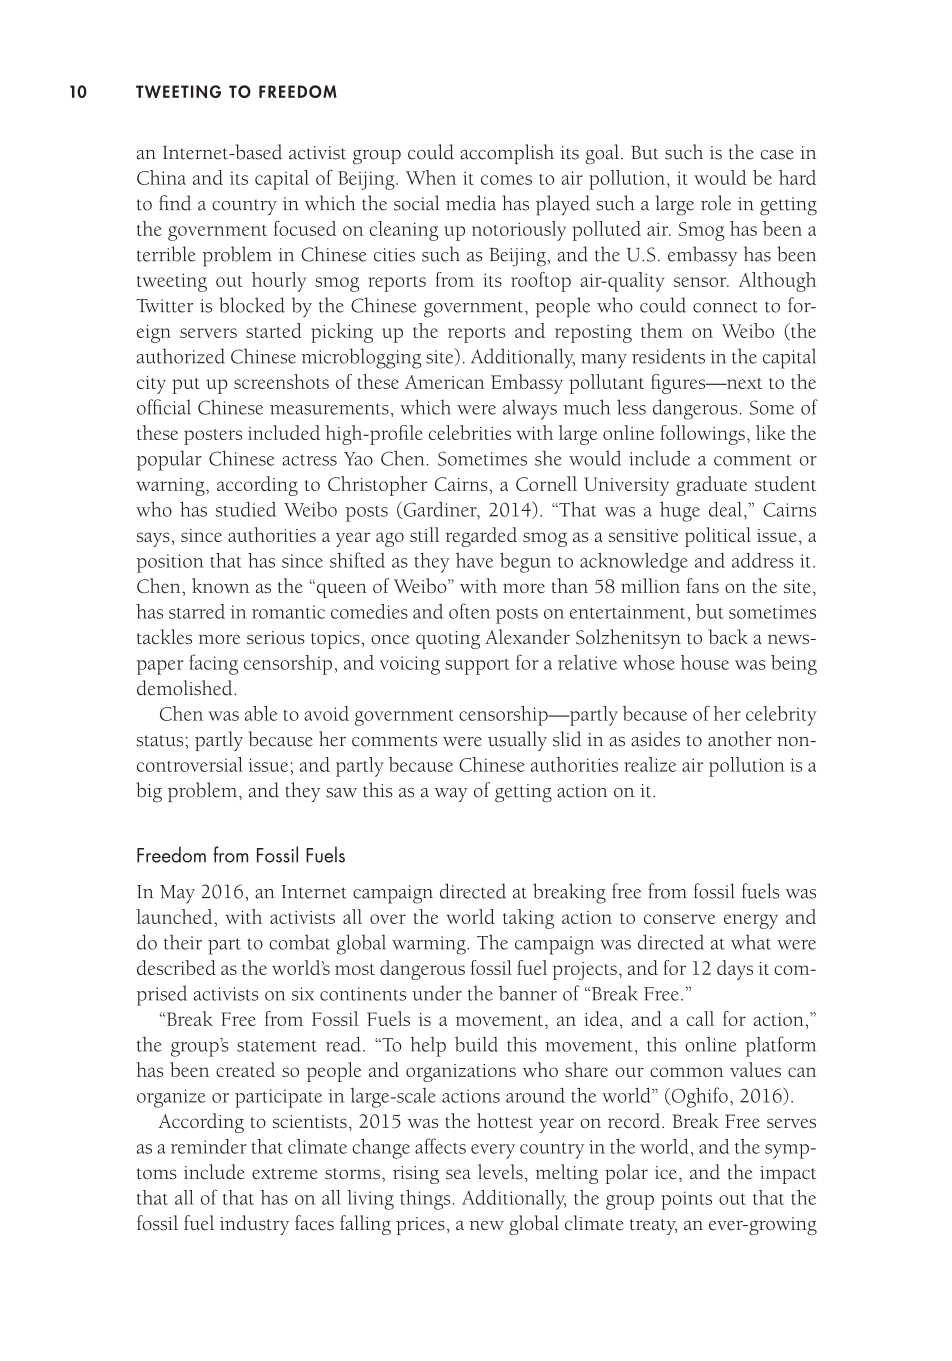 Tweeting to Freedom: An Encyclopedia of Citizen Protests and Uprisings around the World page 10